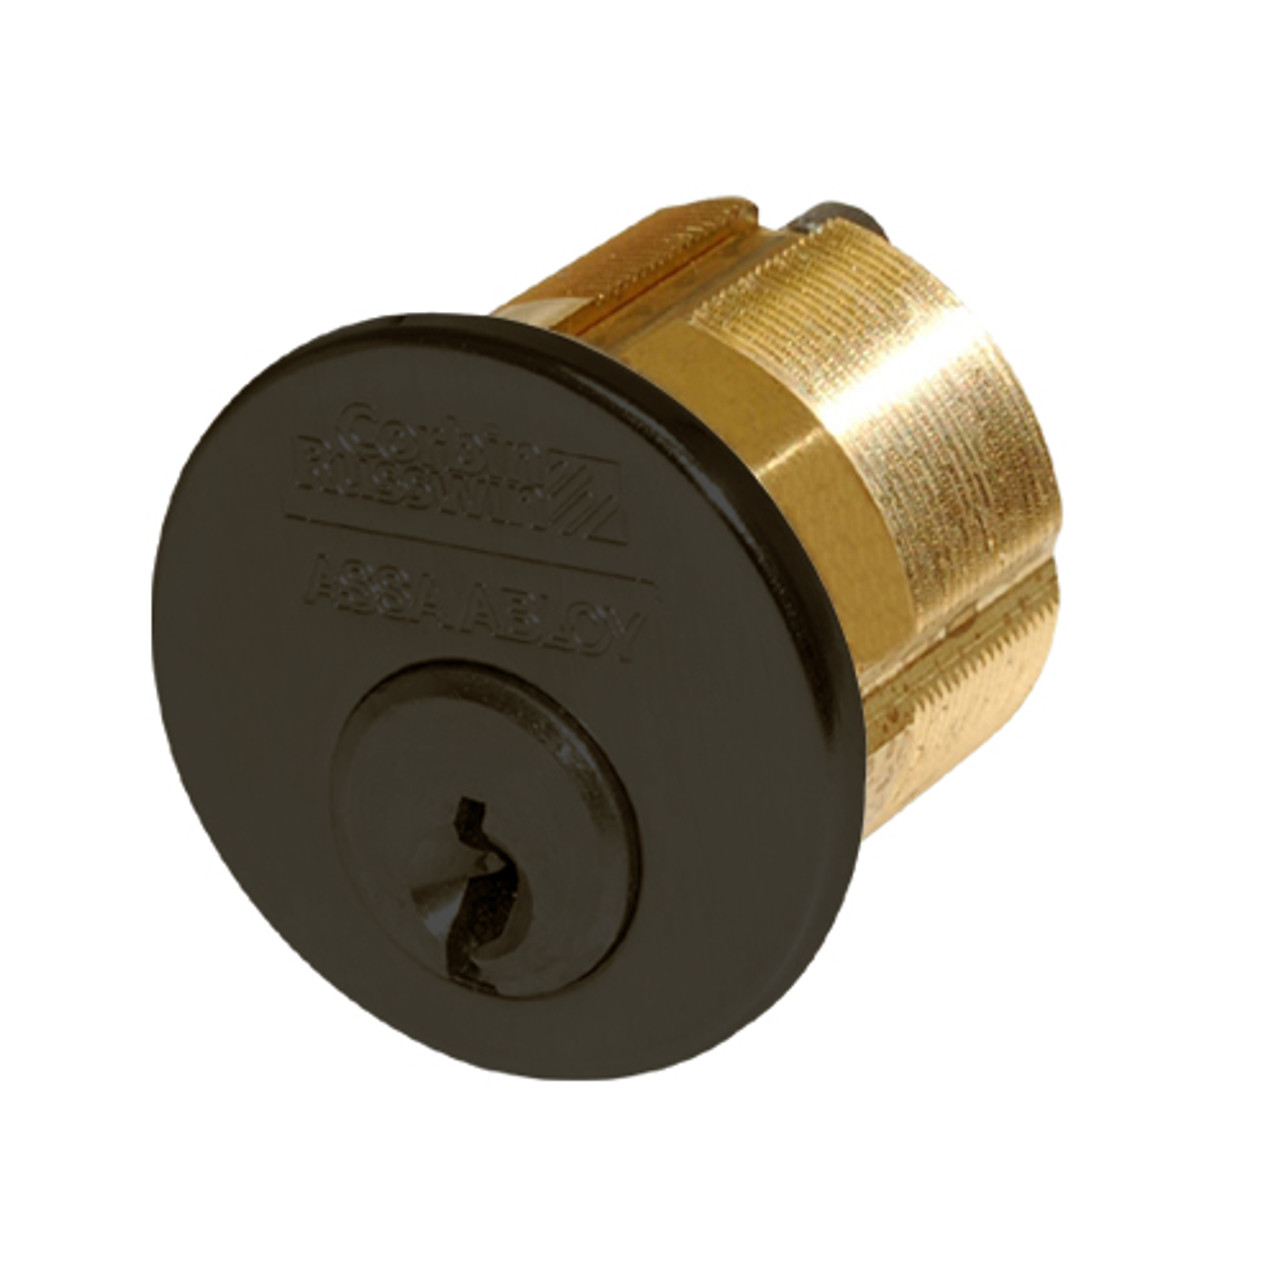 CR1000-138-A02-6-57A1-613 Corbin Conventional Mortise Cylinder for Mortise Lock and DL3000 Deadlocks with Straight Cam in Oil Rubbed Bronze Finish